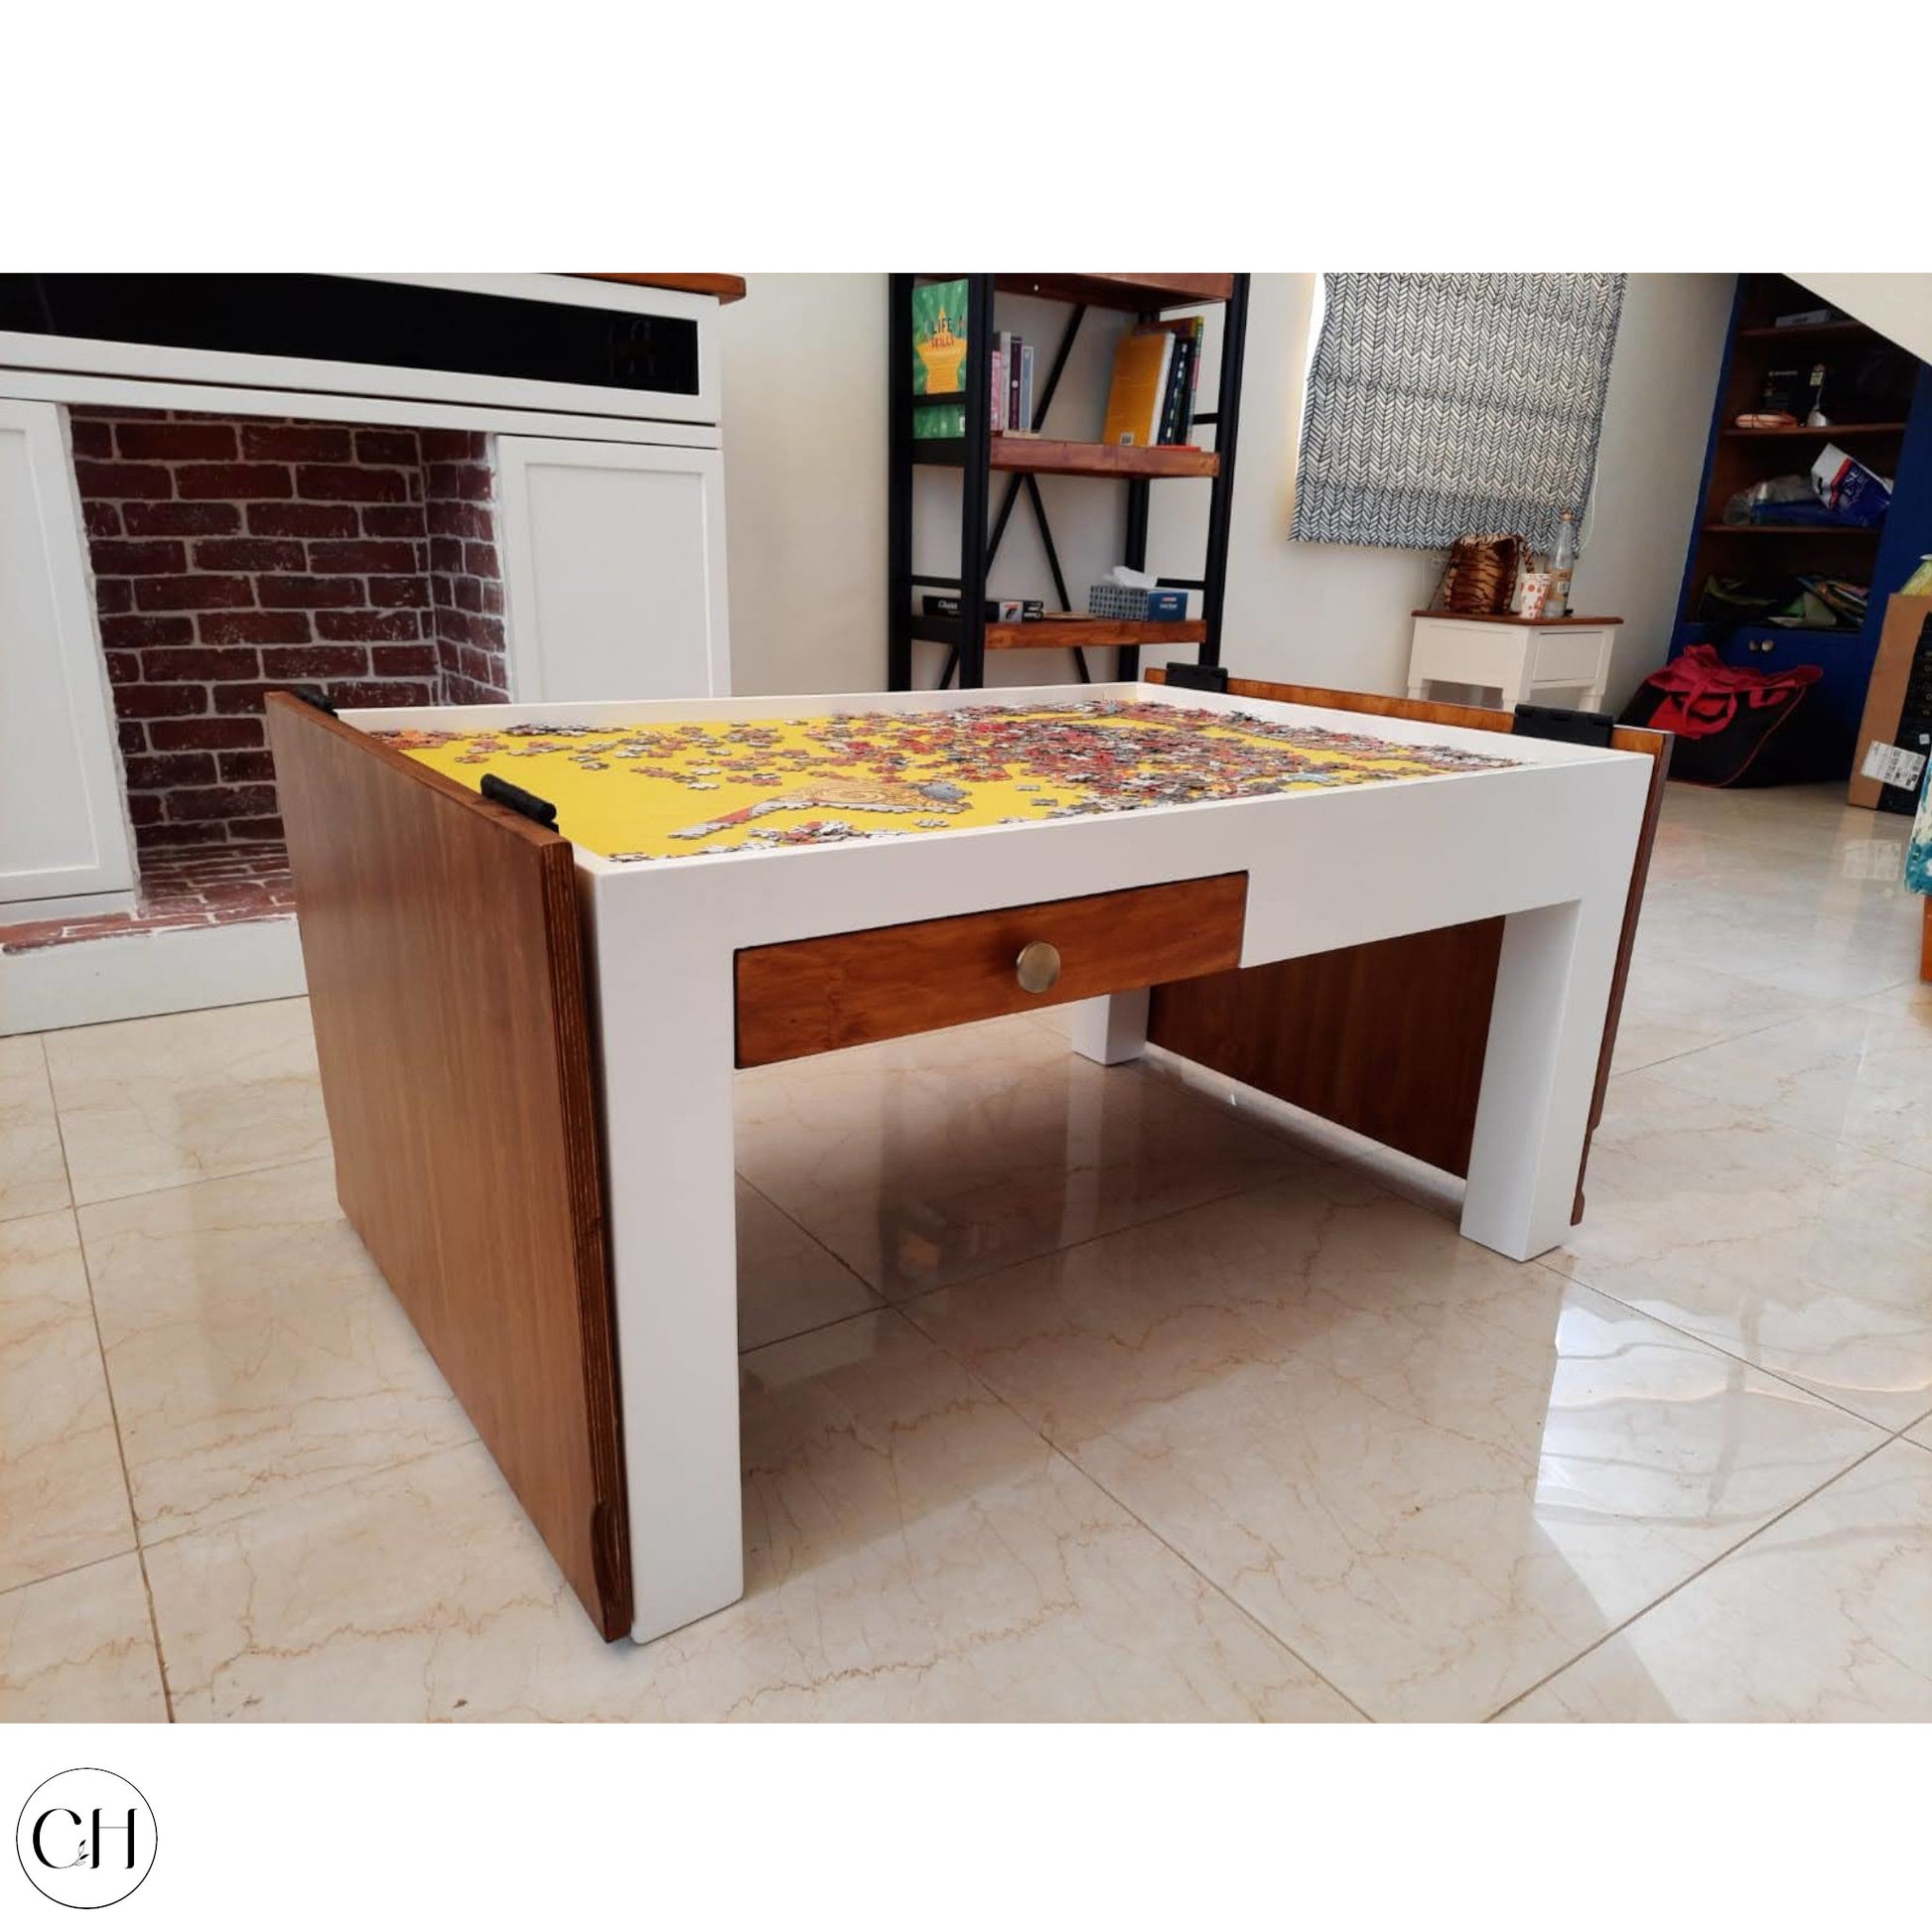 CustHum-Spilsbury-coffee table with folding top to store jigsaw puzzle, small drawer (ISO, open)